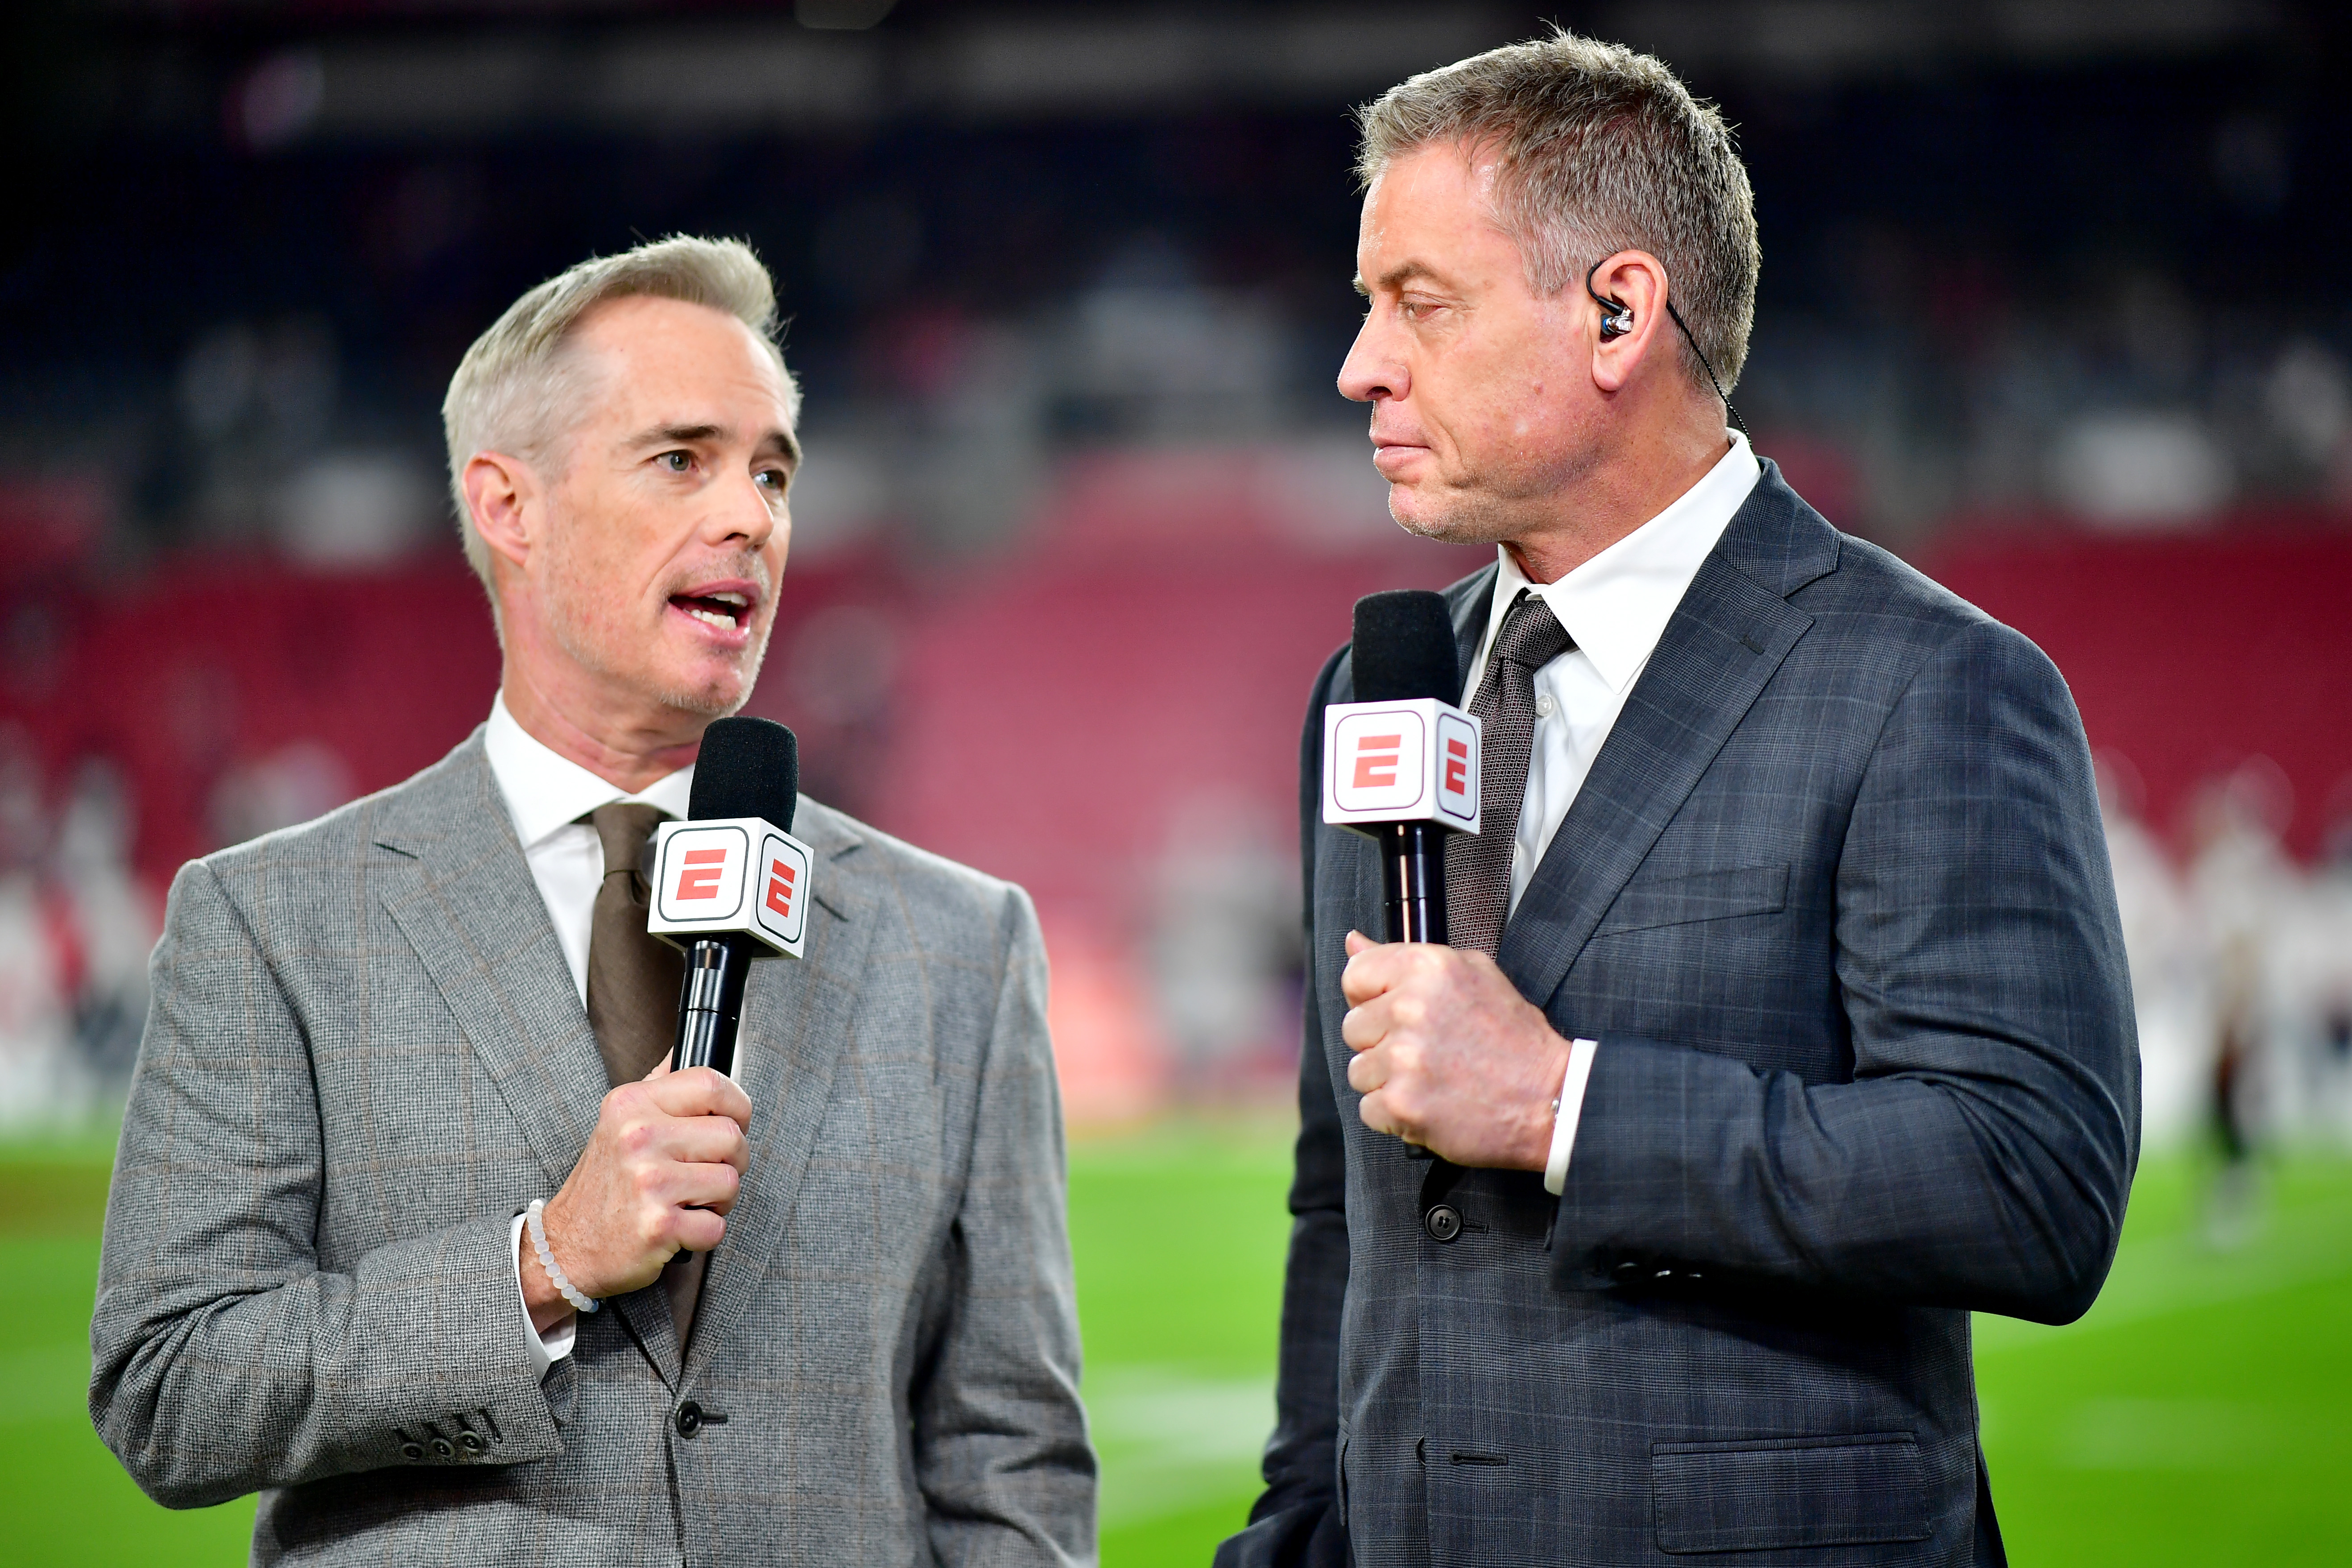 Joe Buck Expertly Claps Back At Hater